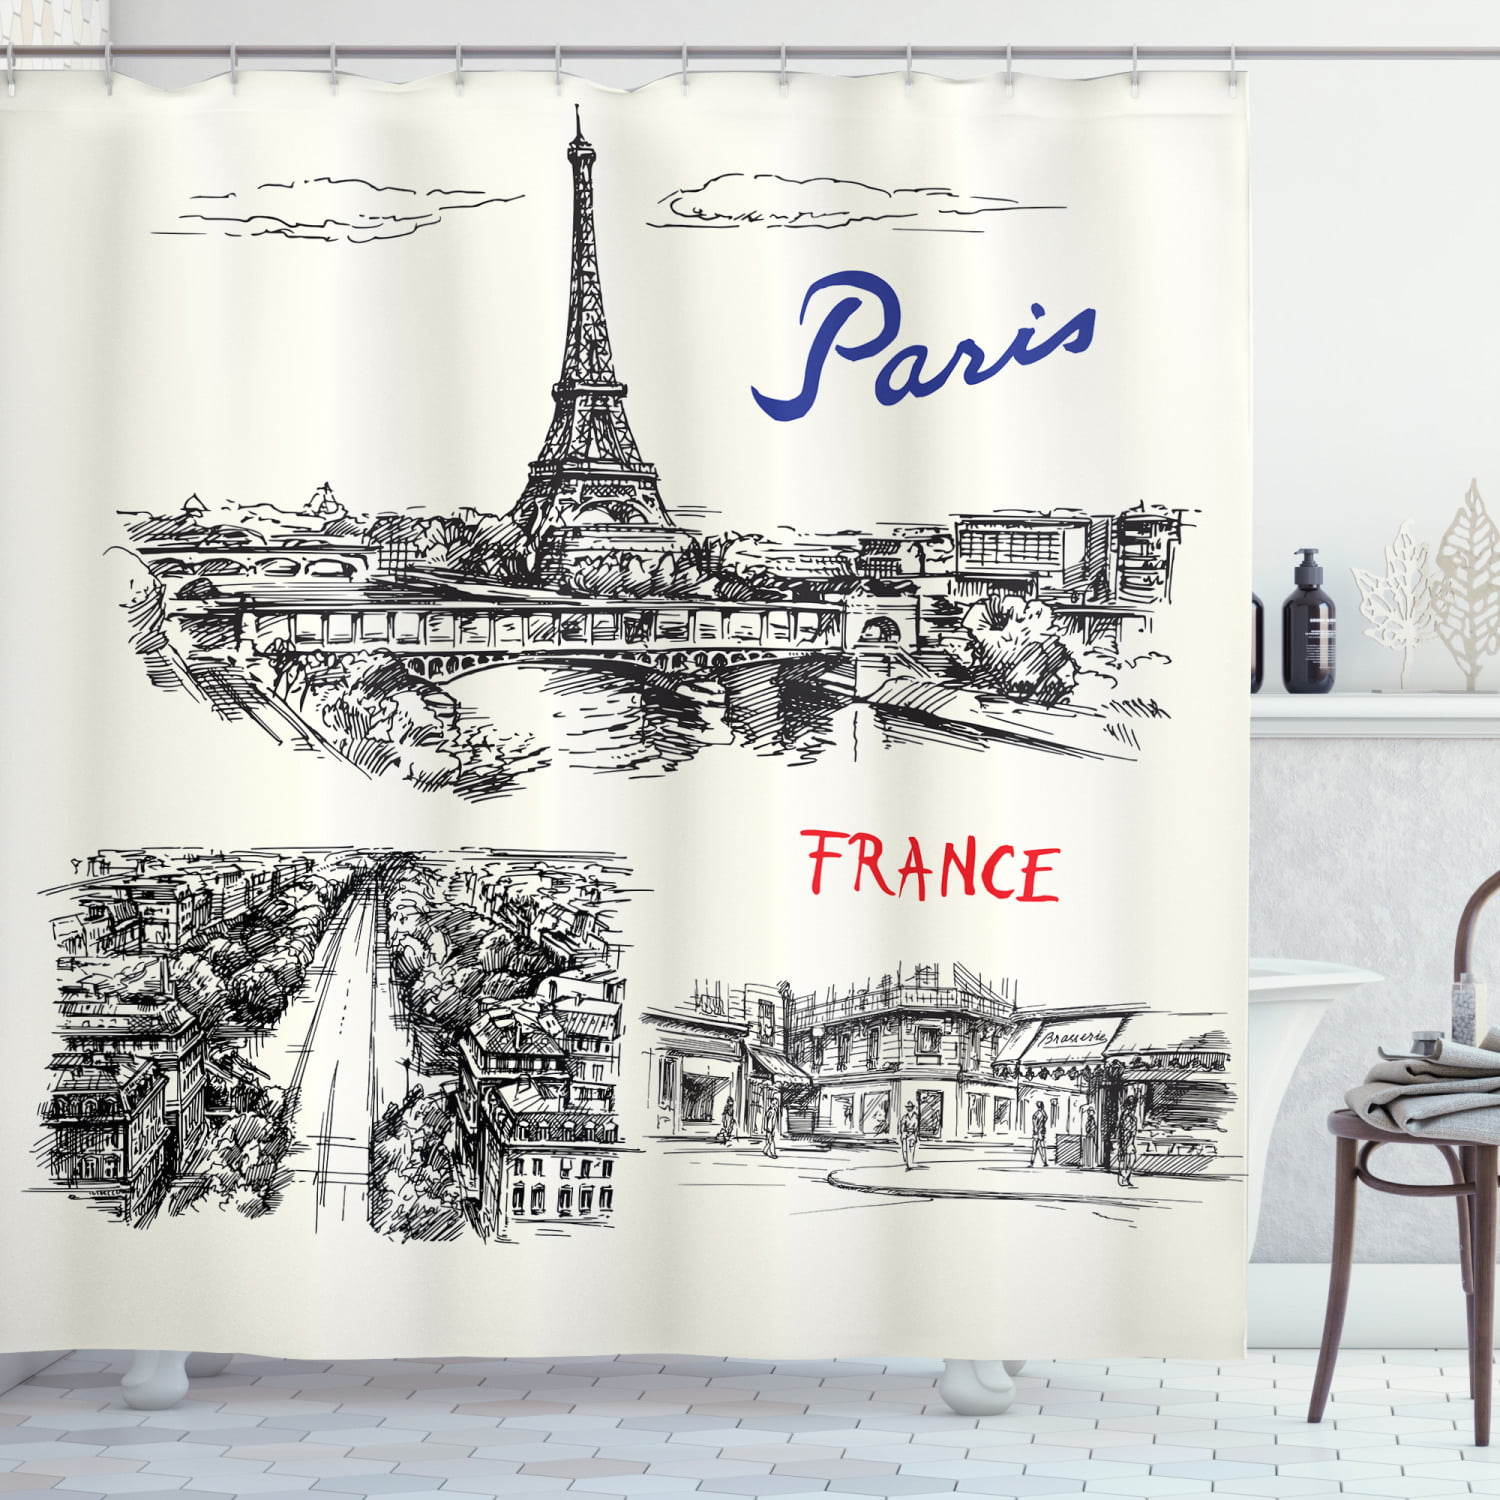 Couple Next To Eiffel Tower Bathroom Fabric Shower Curtain 71X71 Inches 12 Hooks 